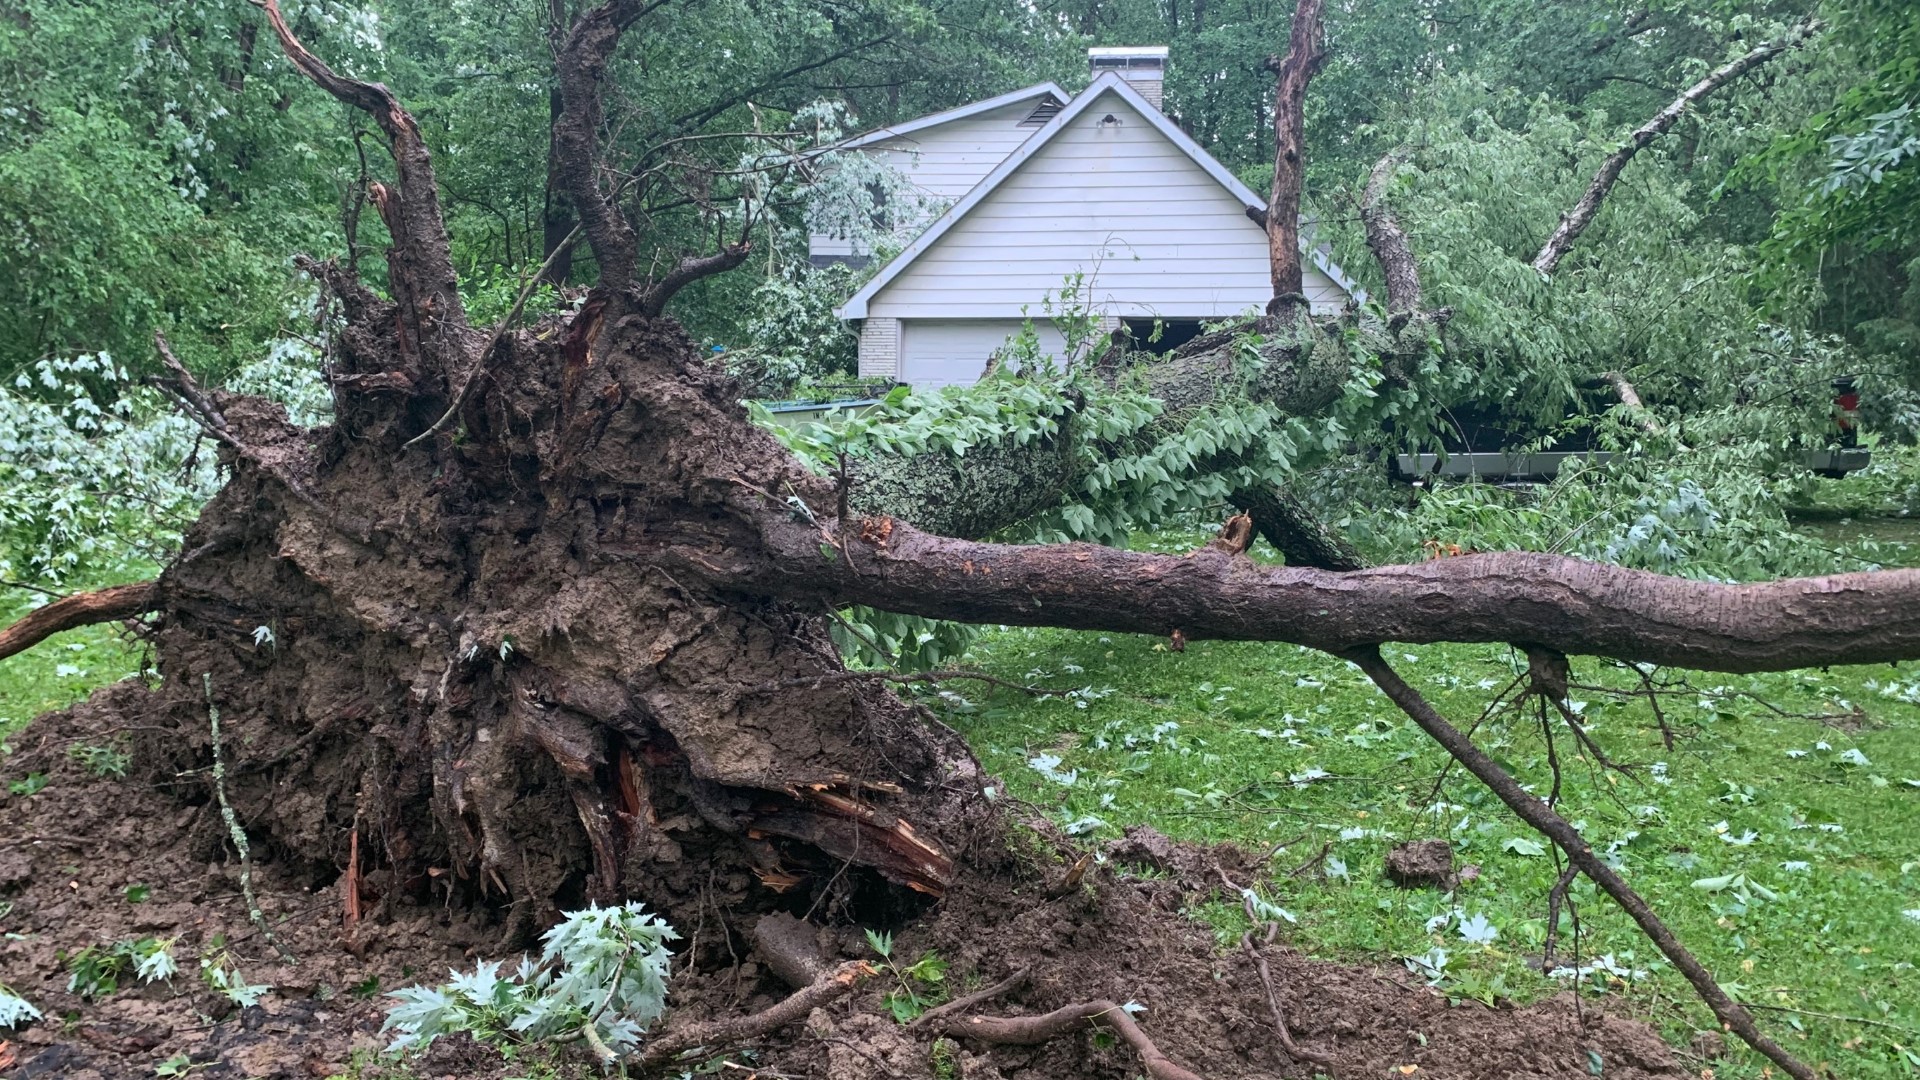 Many areas of Indiana sustained damage from severe storms that brought heavy rain and high winds Saturday afternoon and evening.